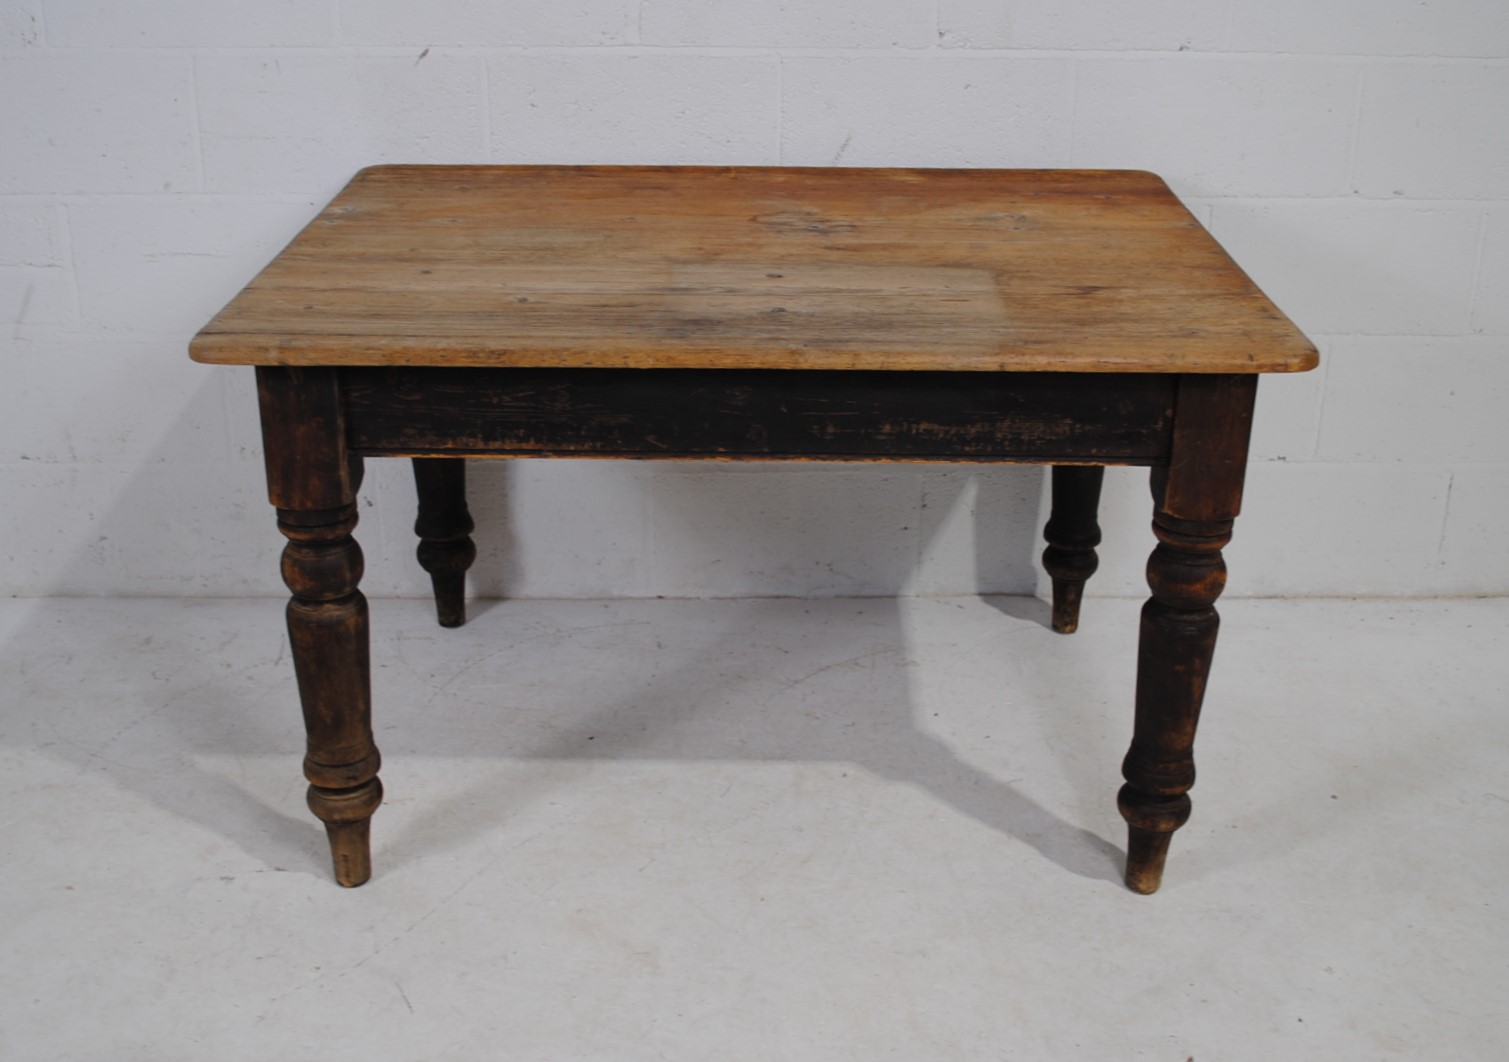 An antique pine farmhouse table, with single drawer, raised on turned legs - length 91cm, depth